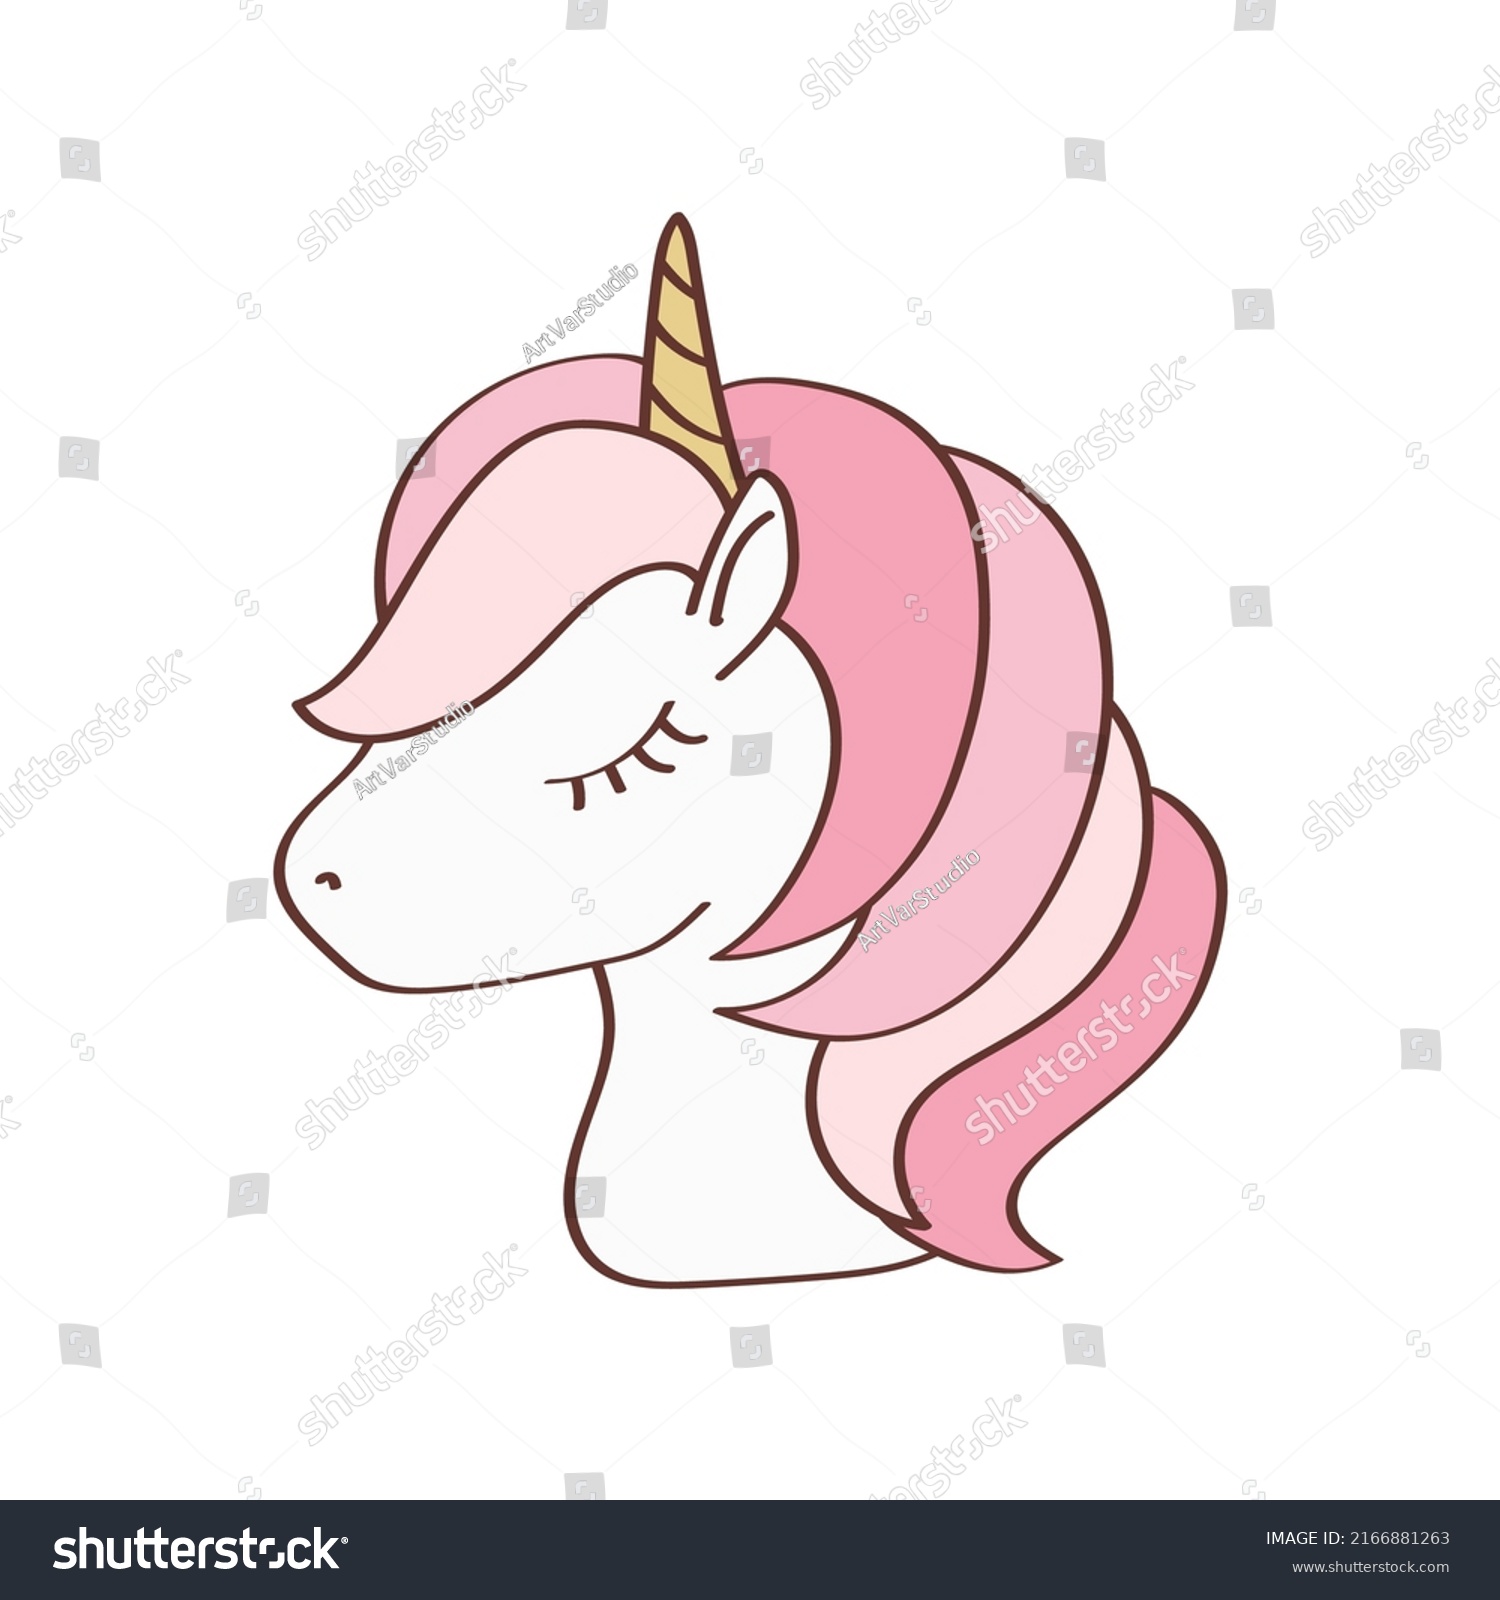 SVG of Unicorn Head Clipart in Cute Cartoon Style Beautiful Clip Art Unicorn Face. Vector Illustration of an Animal for Prints for Clothes, Stickers, Textile, Baby Shower Invitation svg